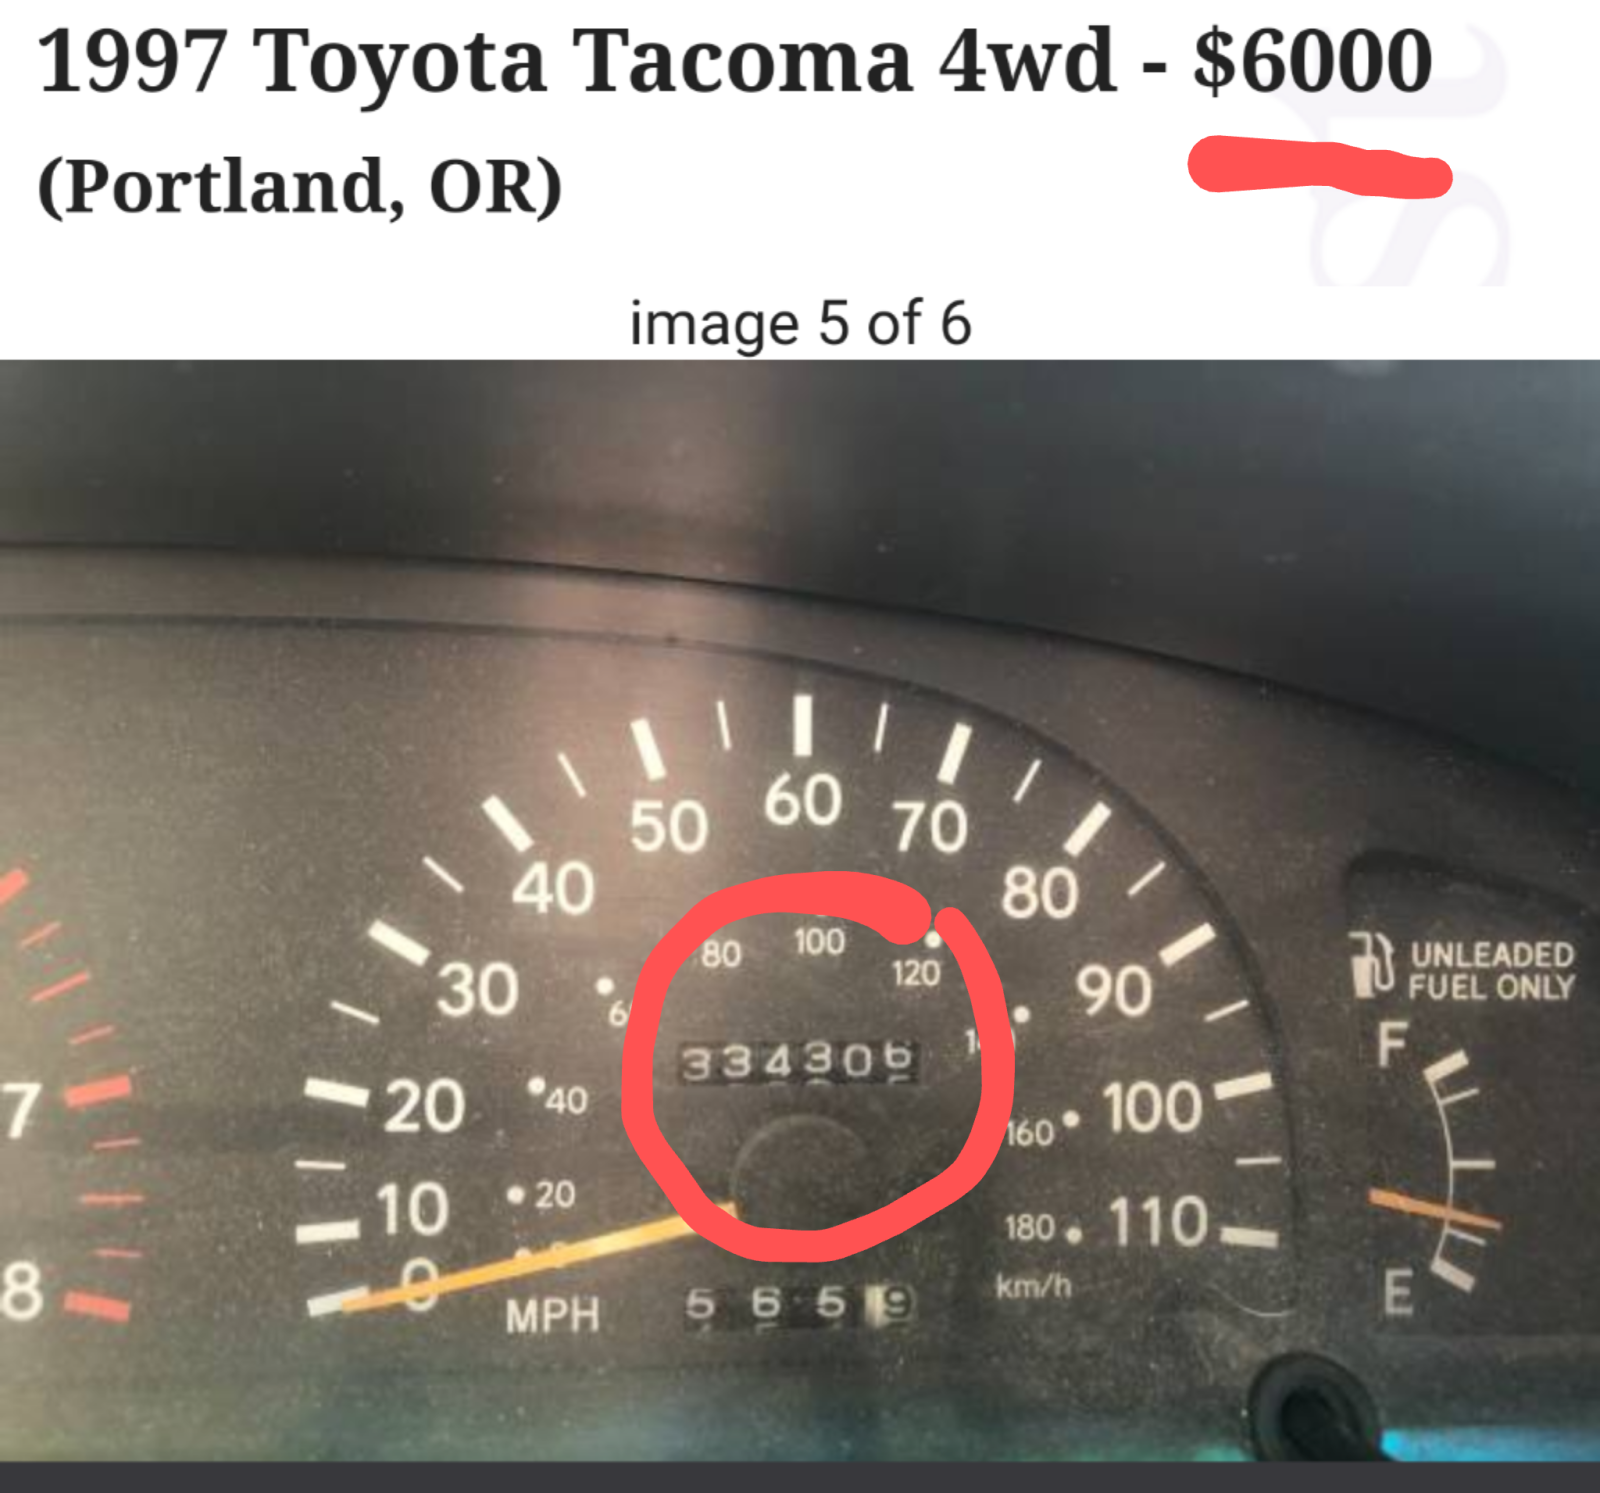 Illustration for article titled Everything wrong with used Tacomas in two photos.